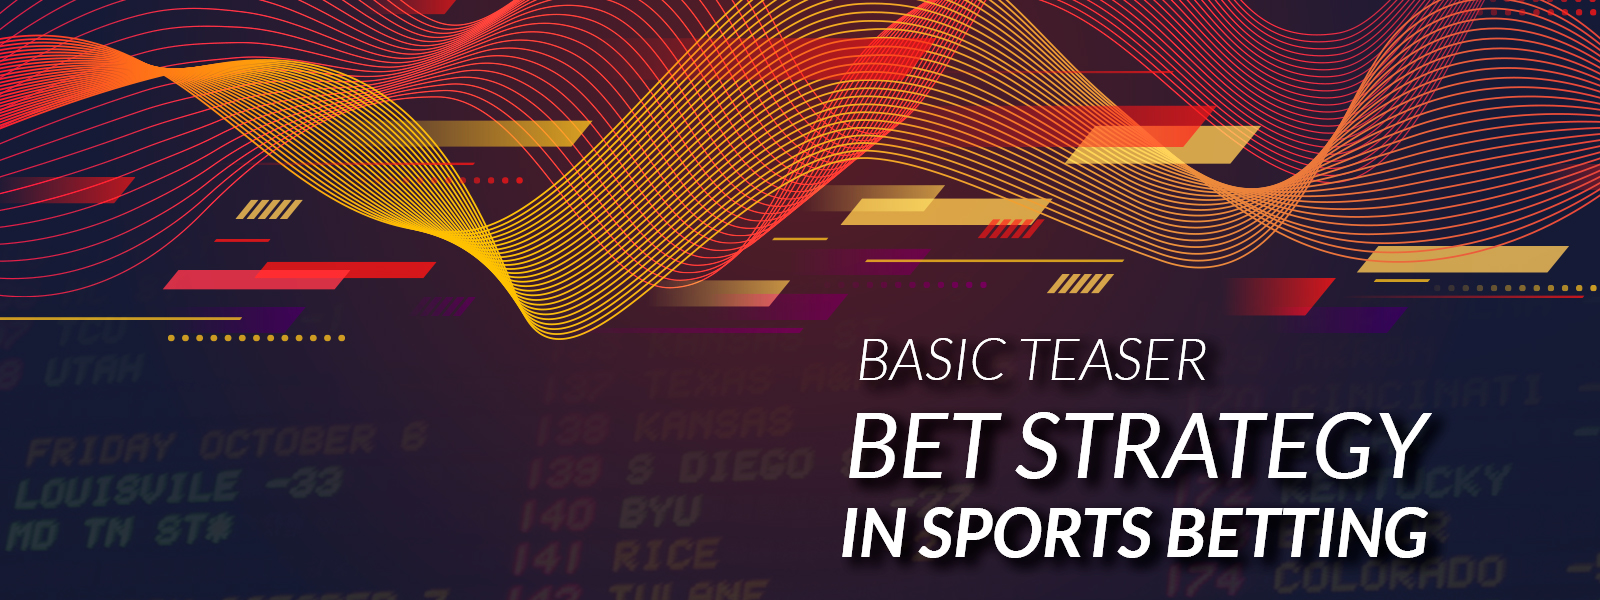 Basic Teaser Bet Strategy in Sports Betting